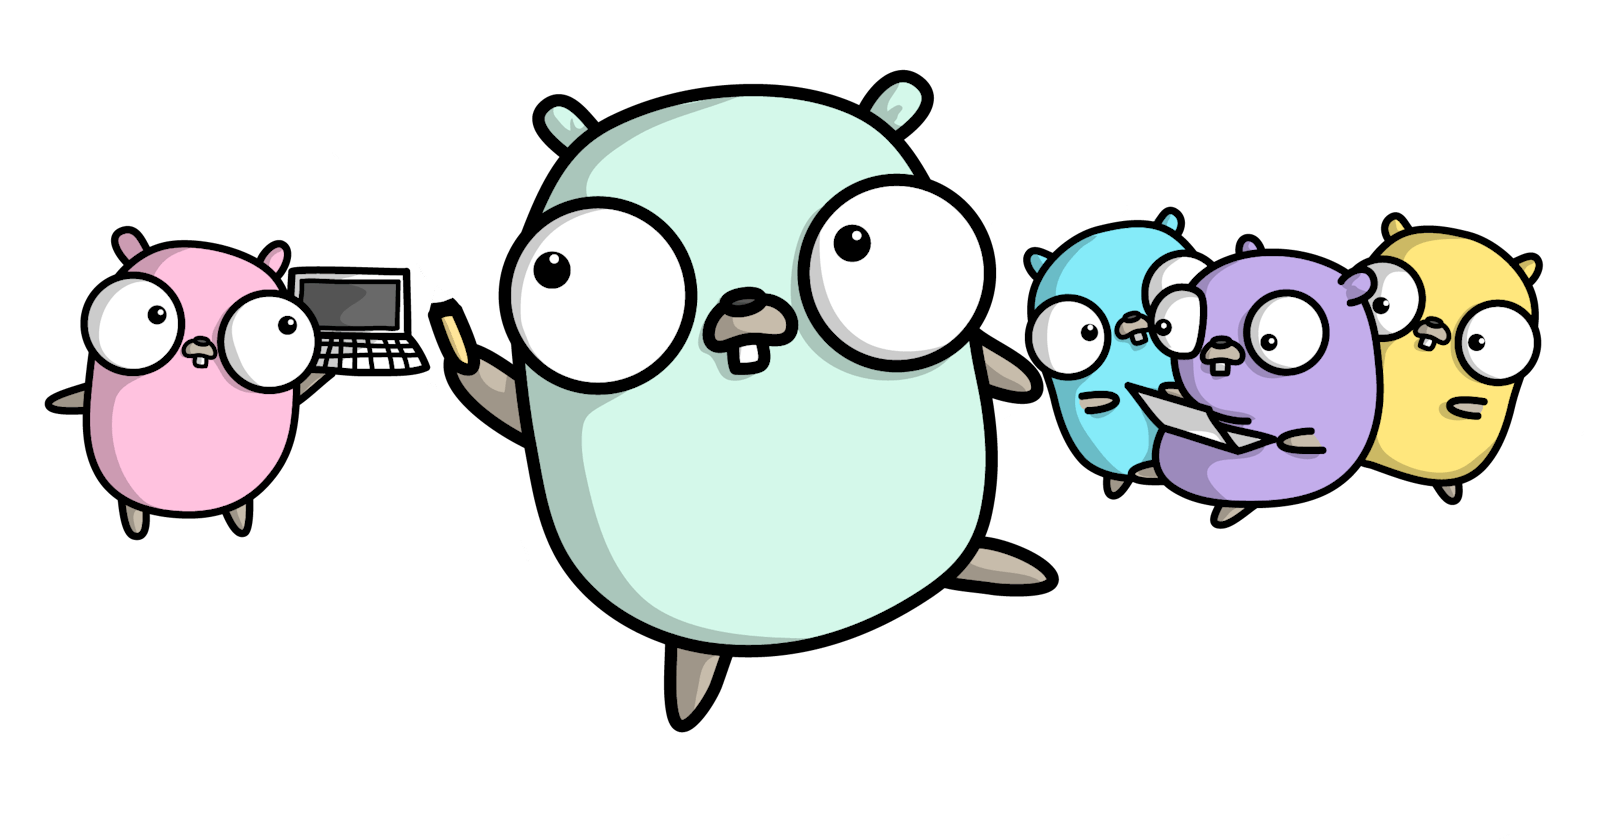 Upgrade your Golang version - The easy way